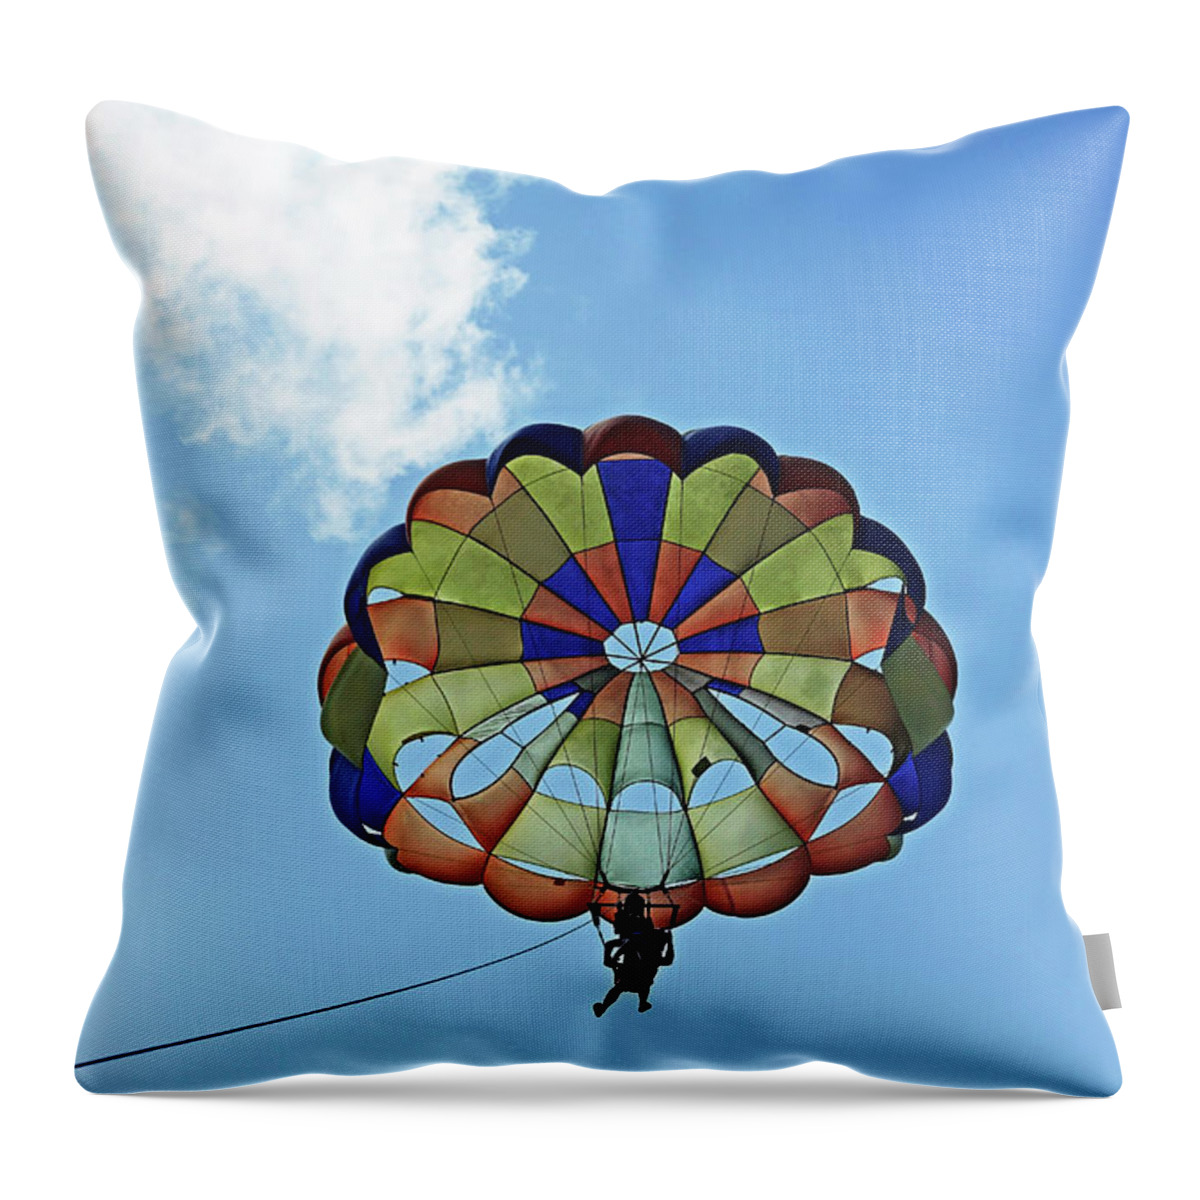 Parasailing Throw Pillow featuring the photograph Parasailing by Debbie Oppermann